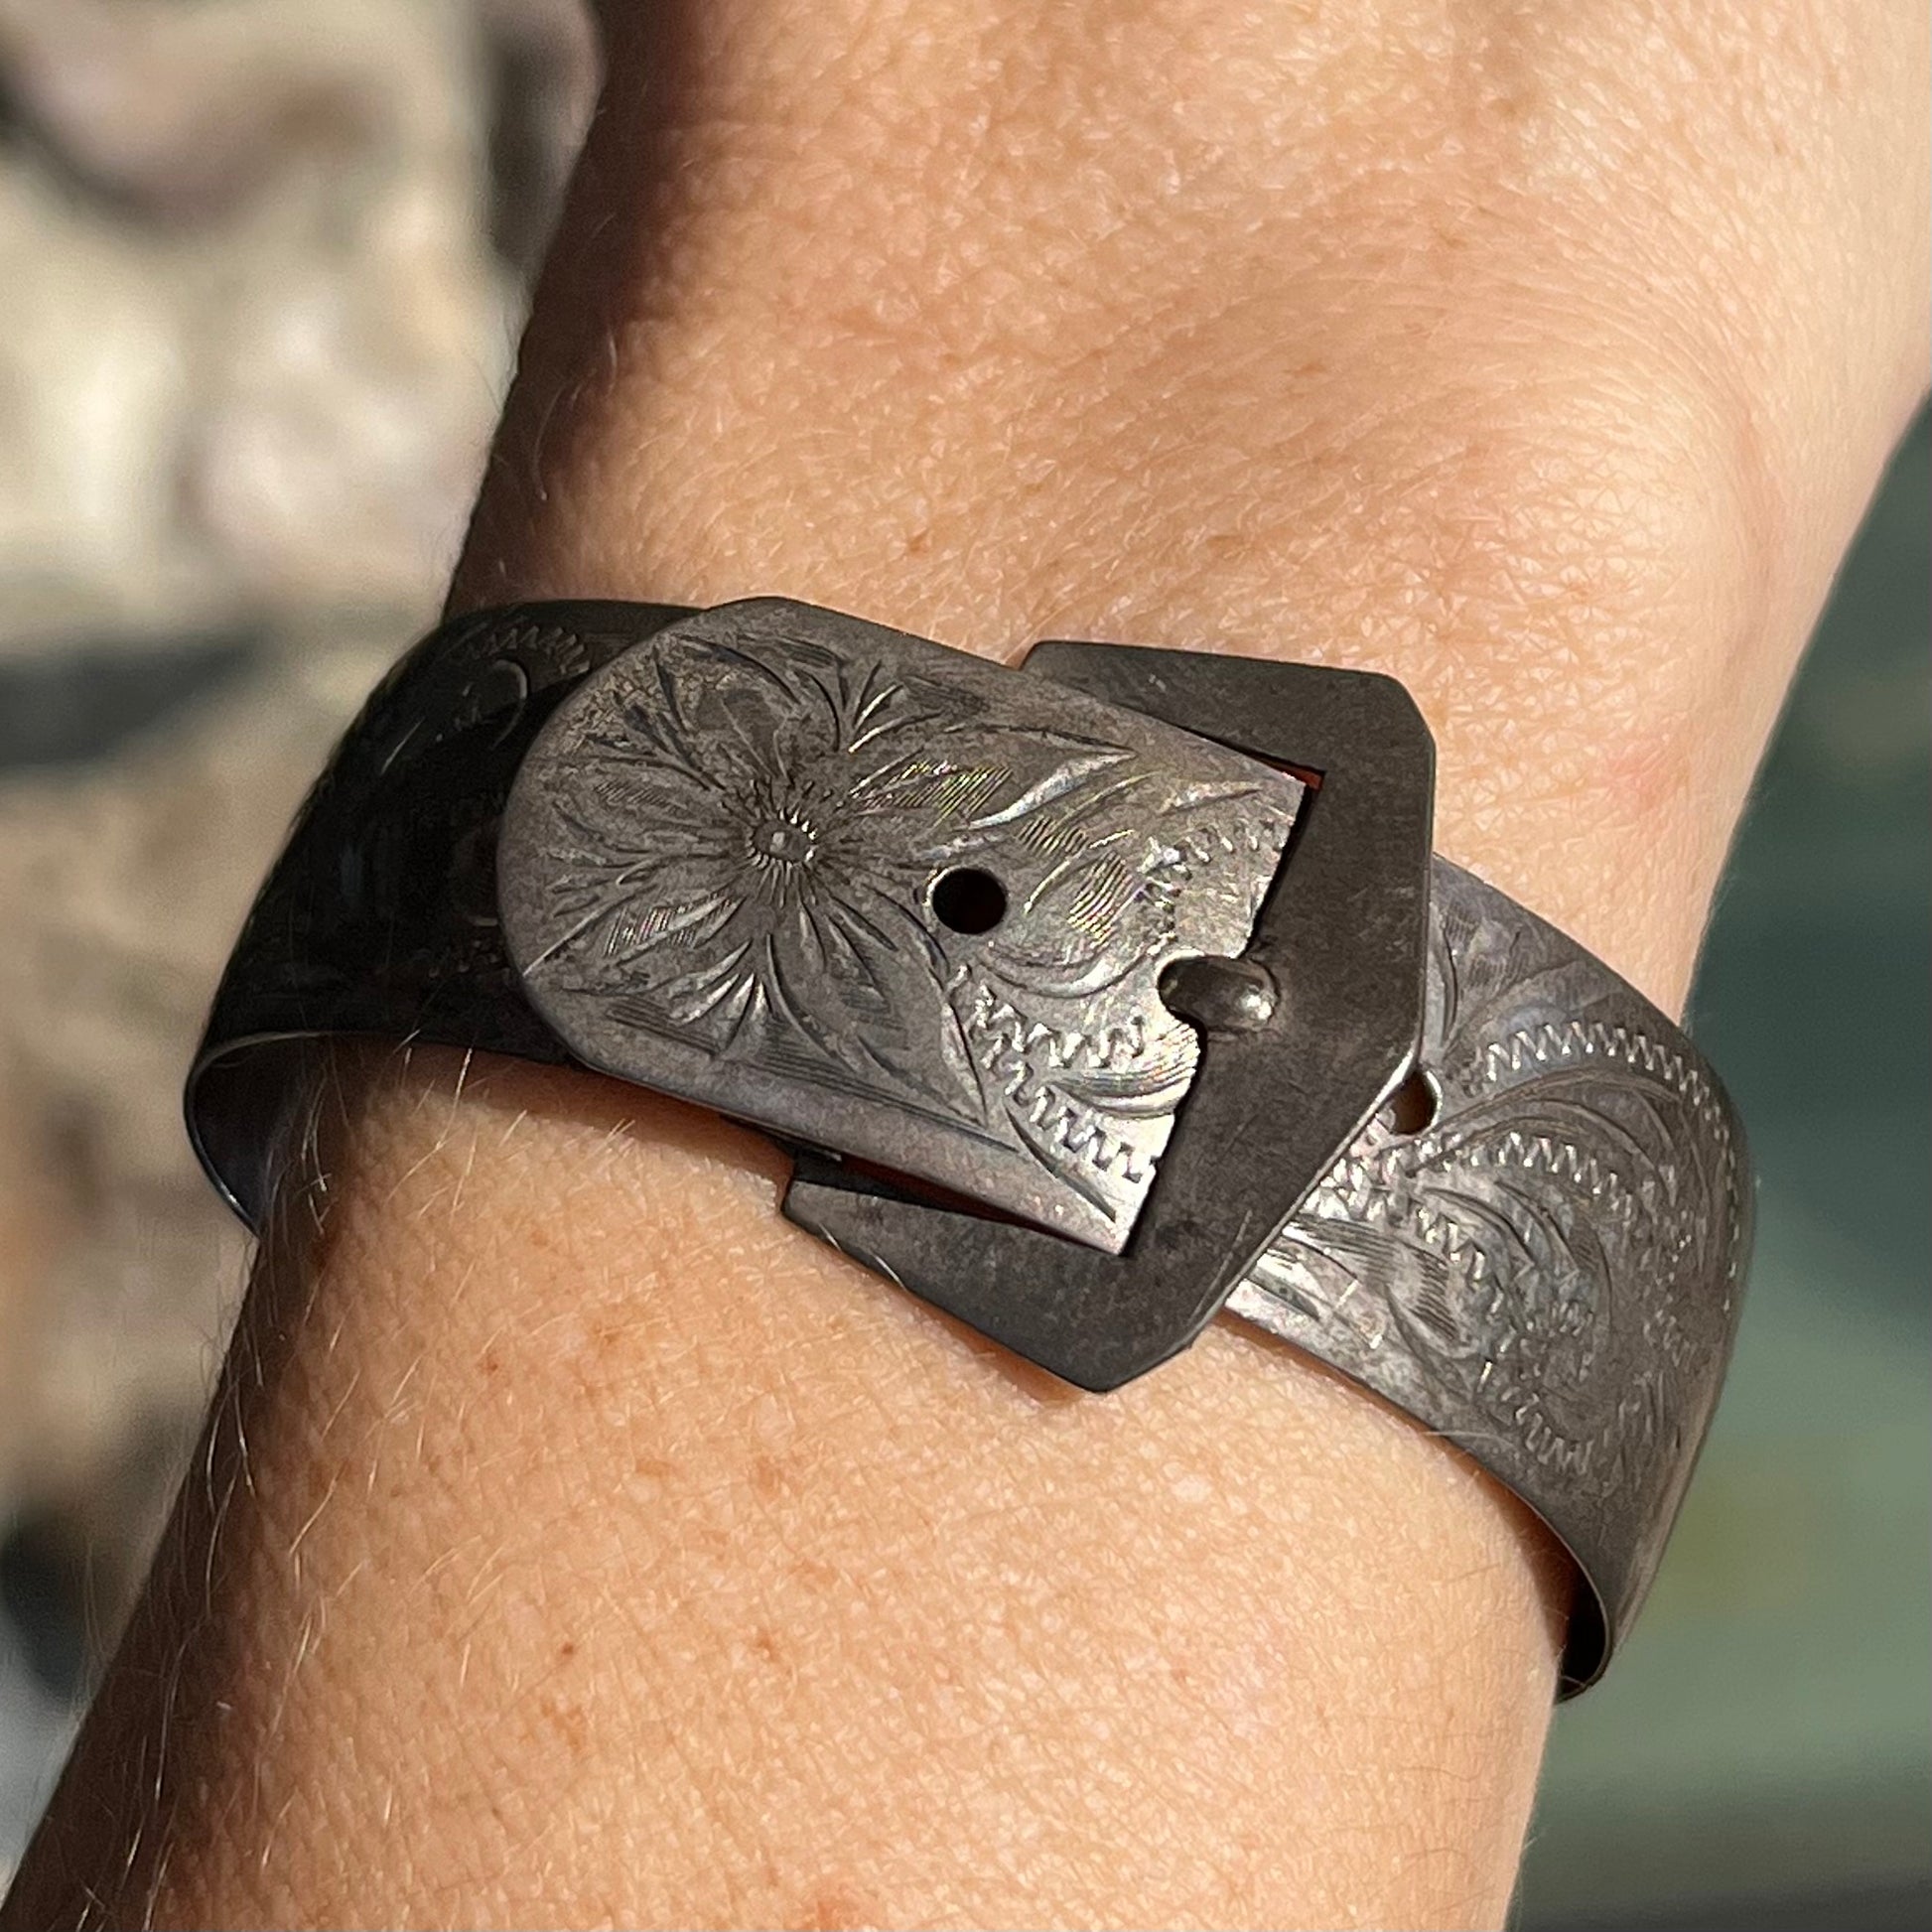 A photo showing a sterling silver antique Art Nouveau buckle bracelet.  The bracelet is engraved and etched with a floral pattern design.  The piece is being displayed on a person's wrist.